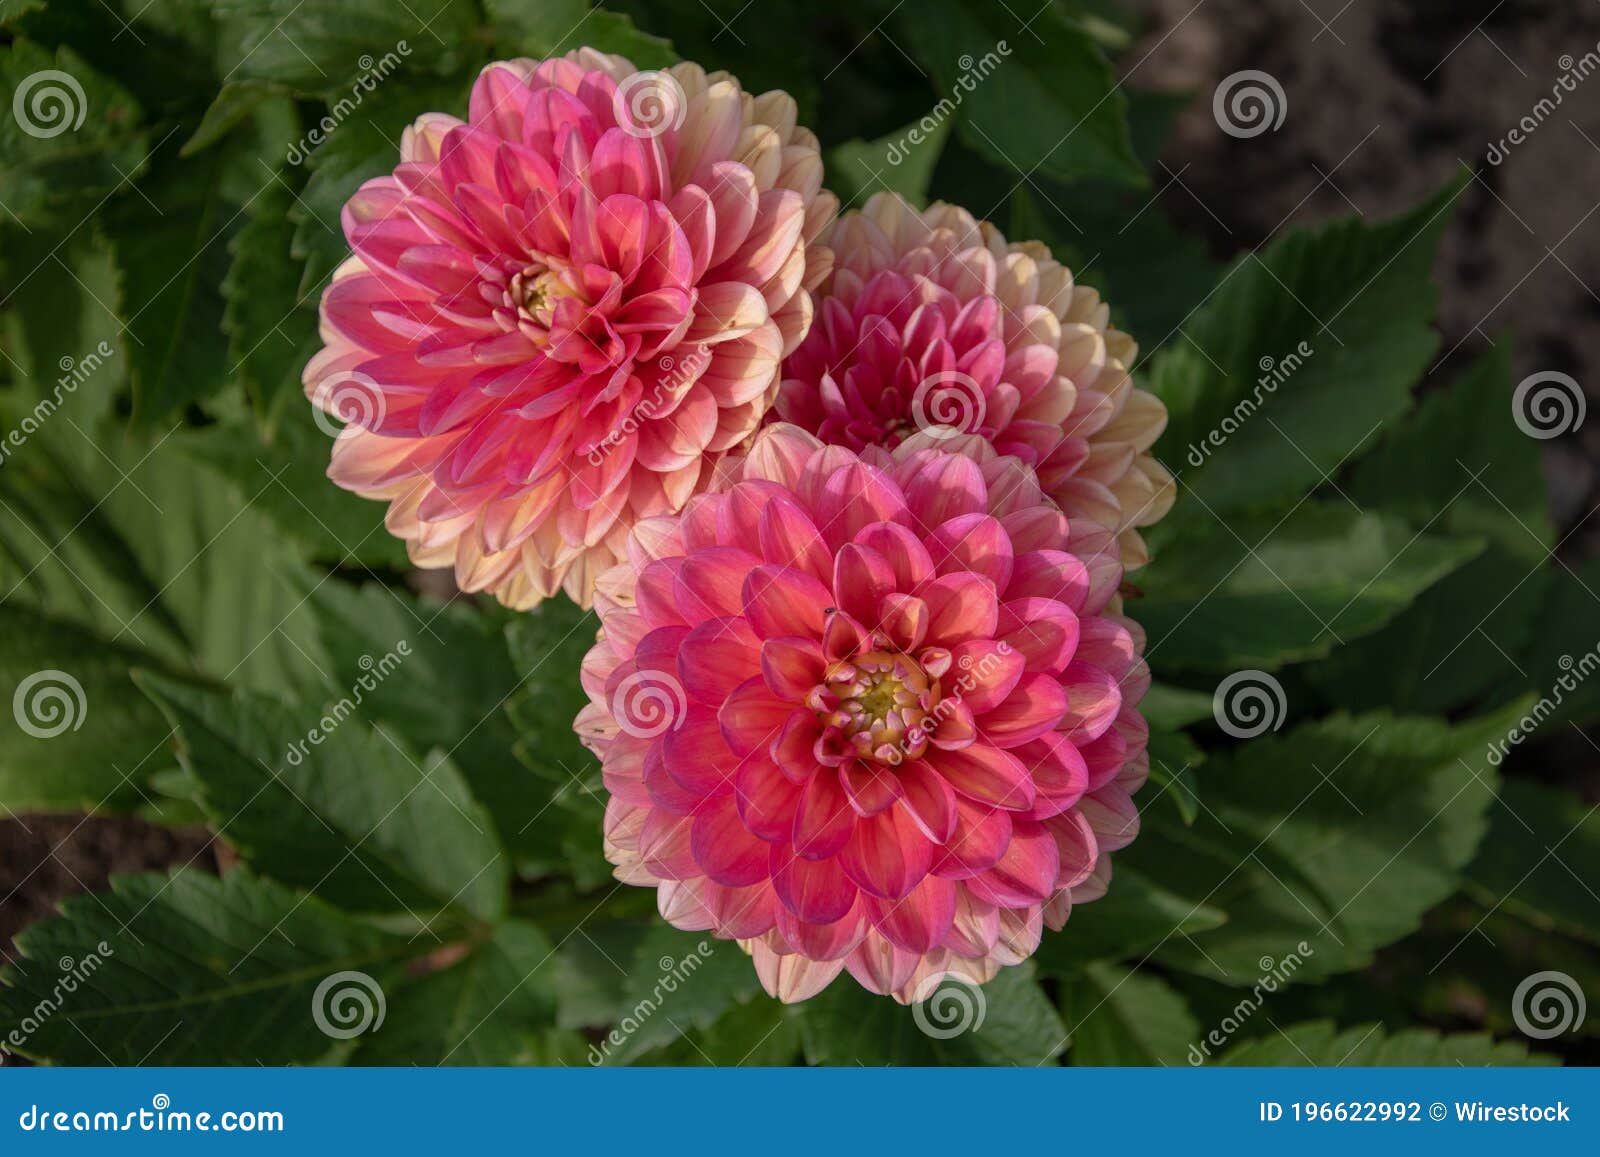 closeup of dahlia melody pink allegro flowers